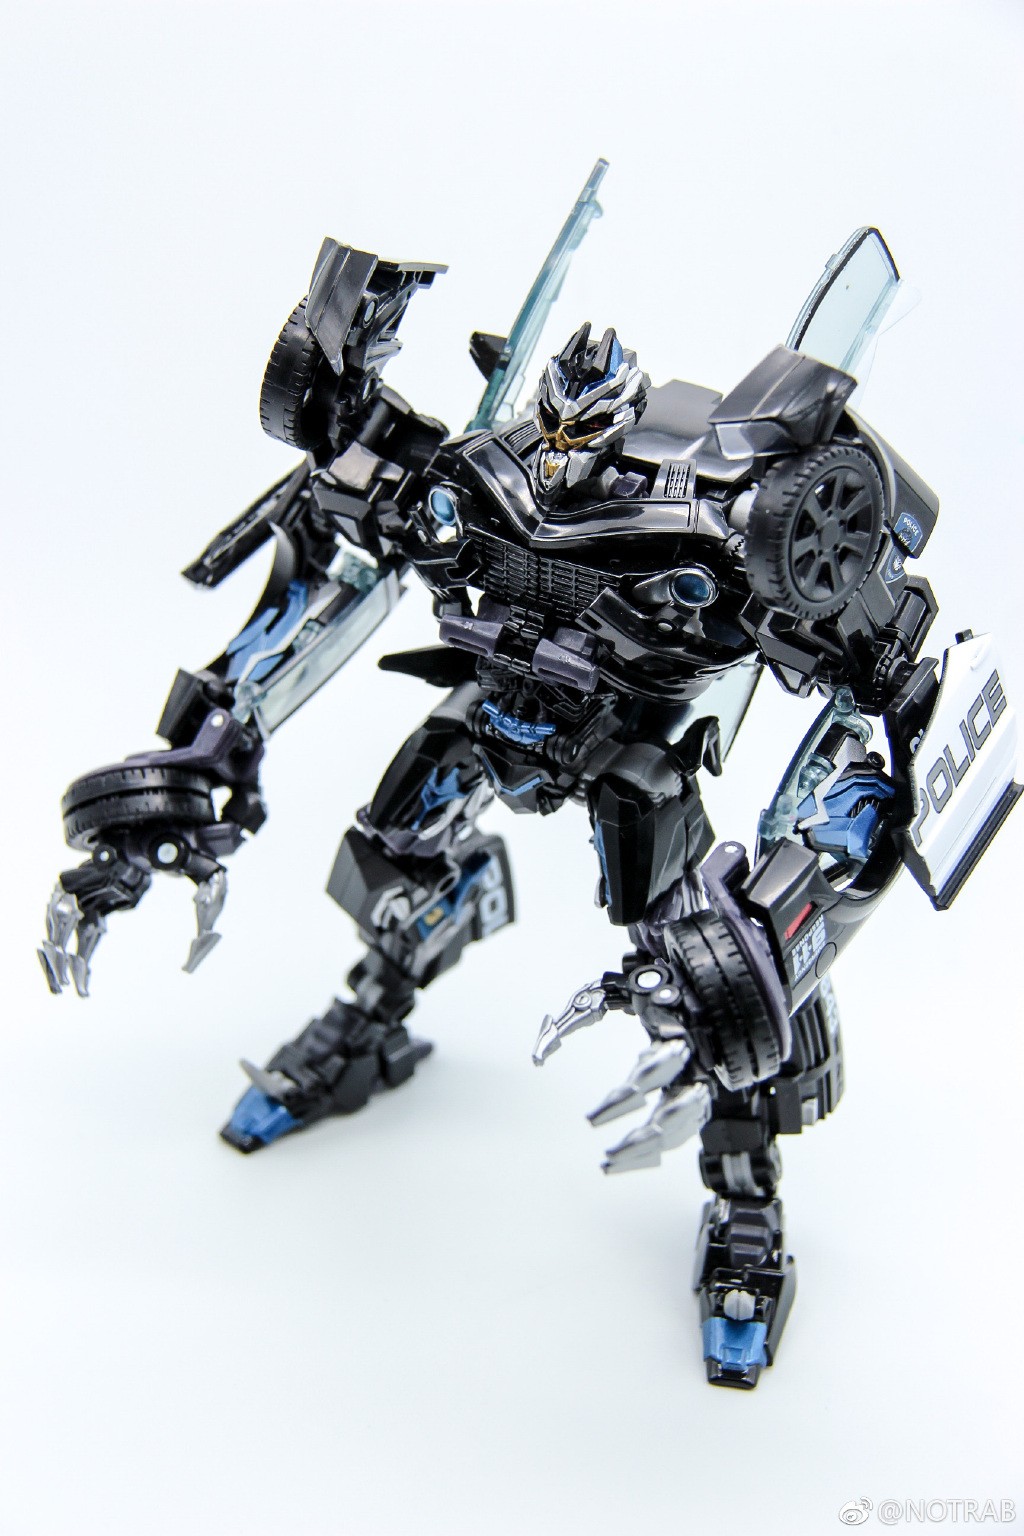 Transformers Masterpiece Movie Series Barricade Mpm-5 Toy Amazon for sale online 